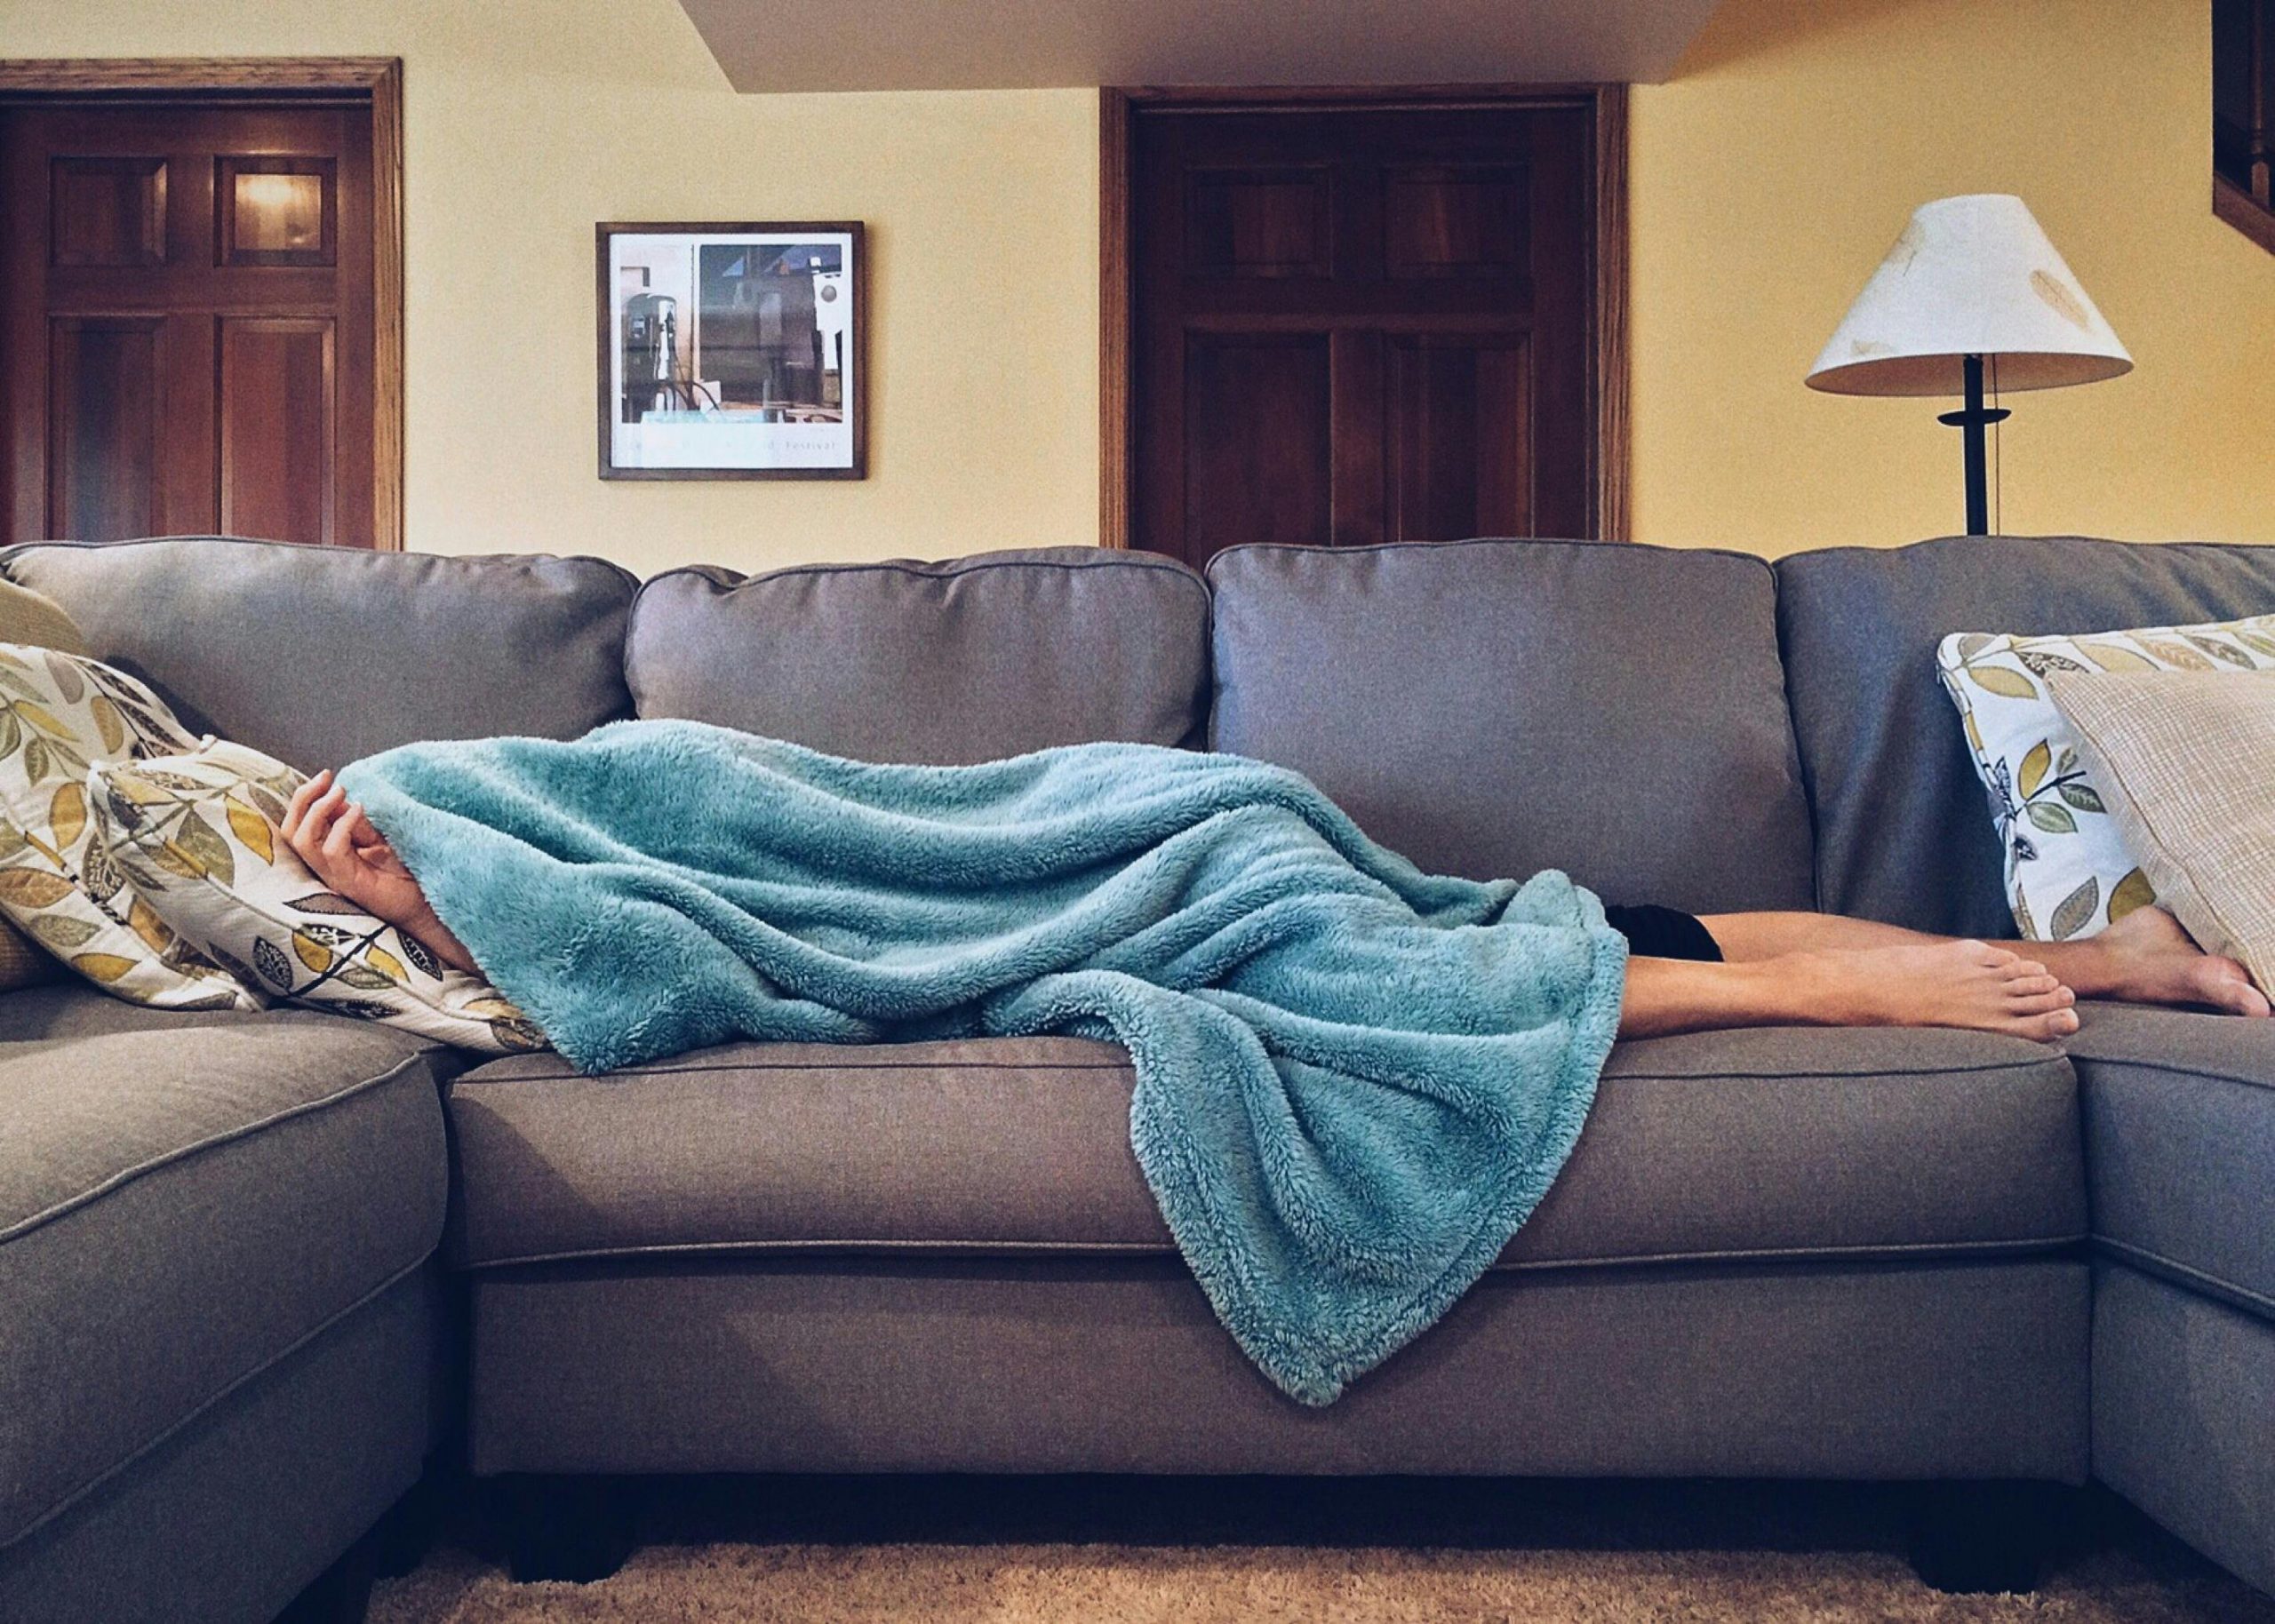 A person laying under a blanket on a couch. Only feet and a hand are visible.